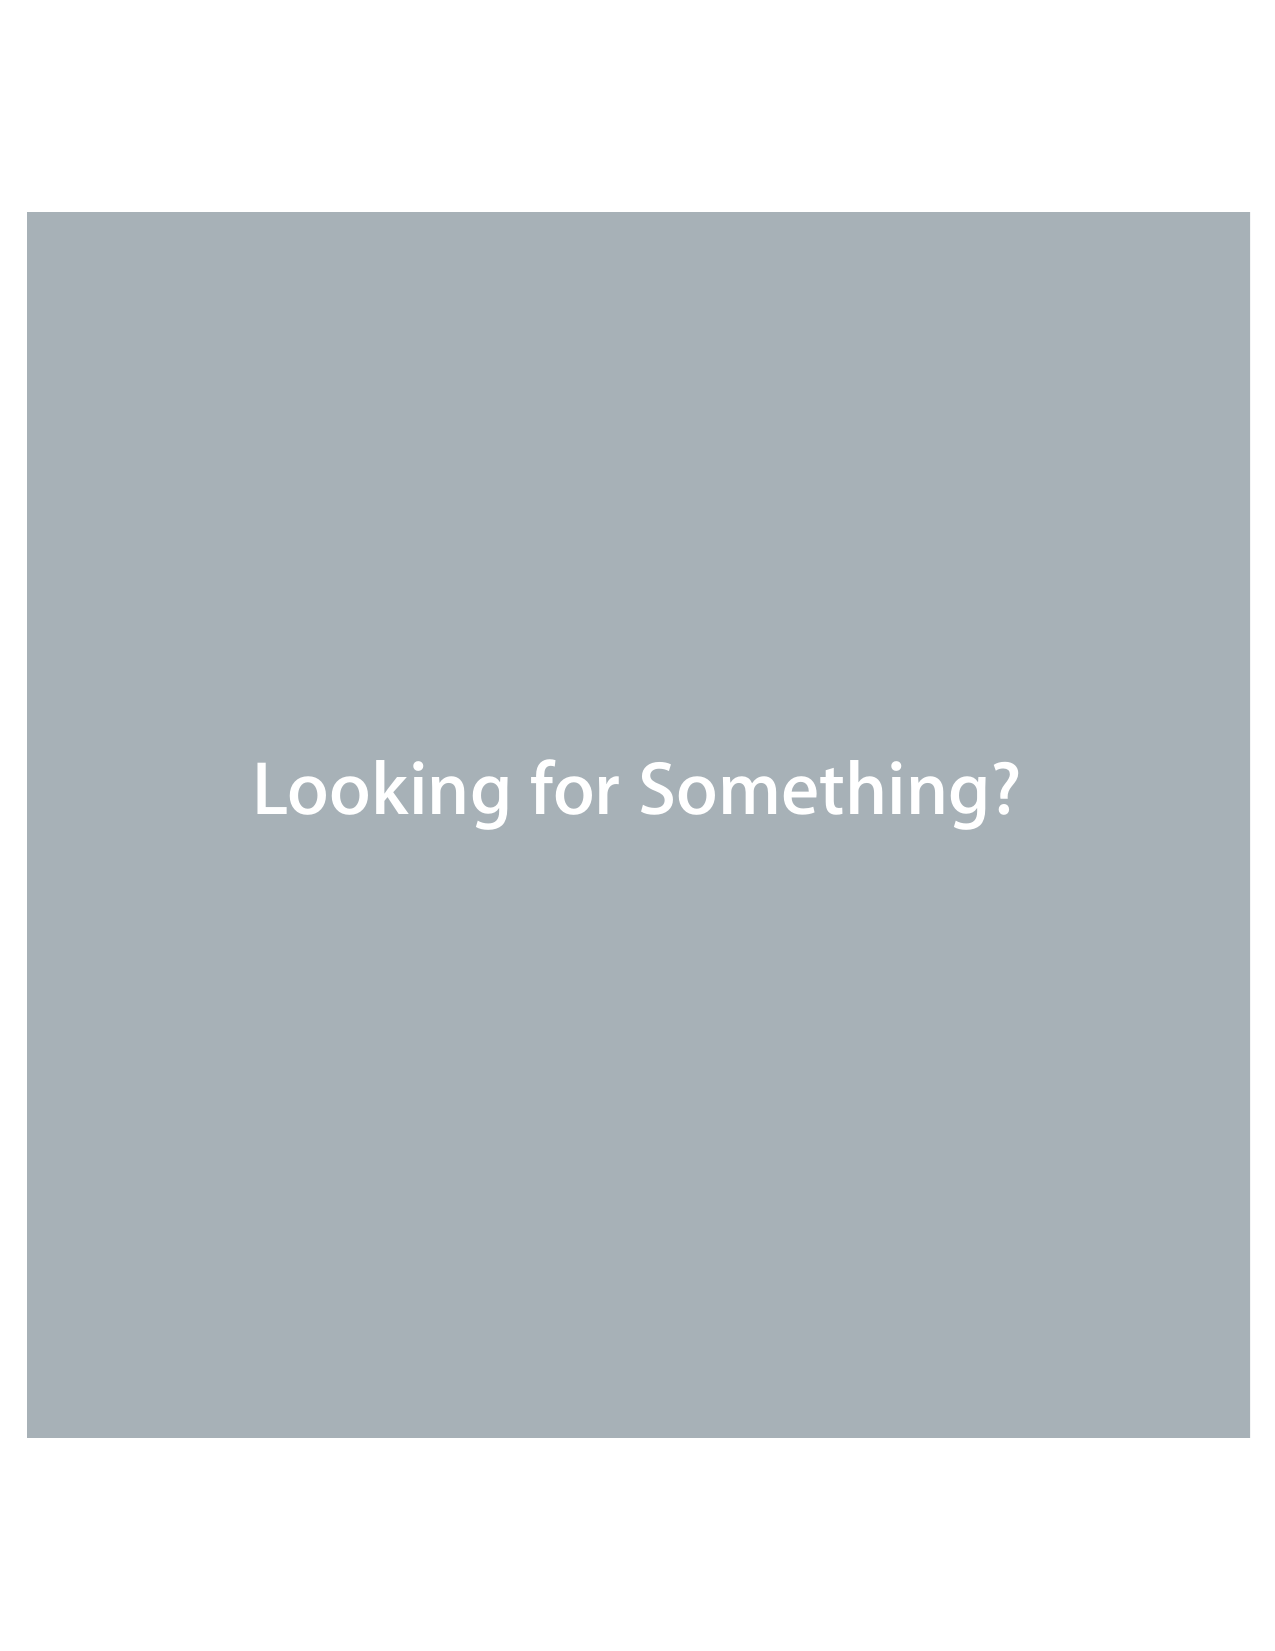 Looking for Something?